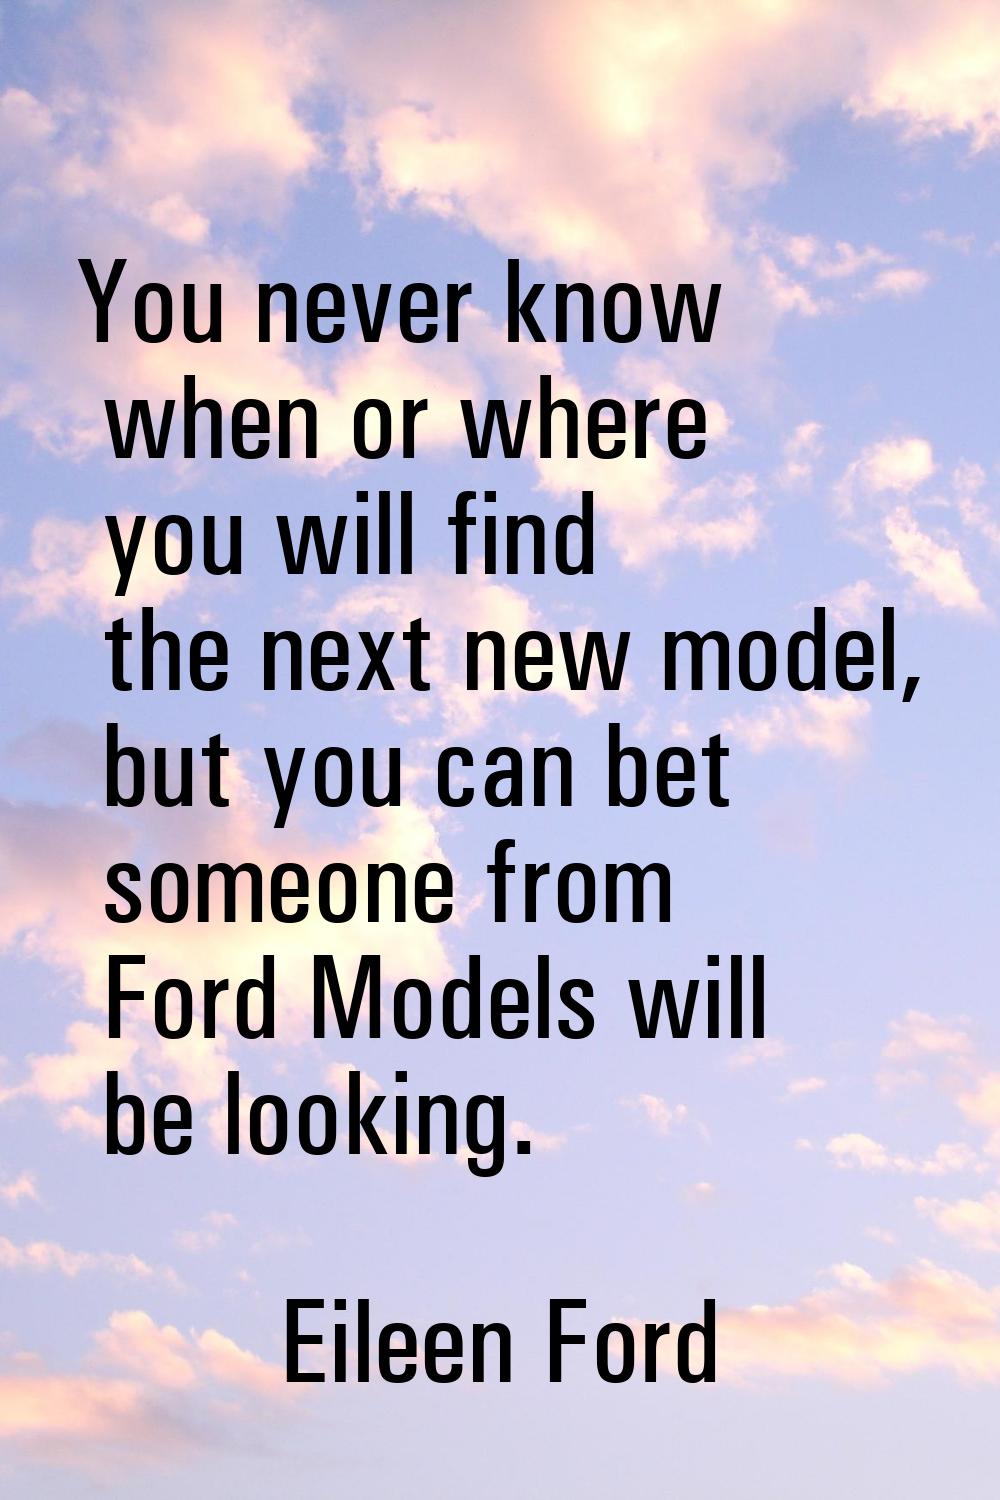 You never know when or where you will find the next new model, but you can bet someone from Ford Mo